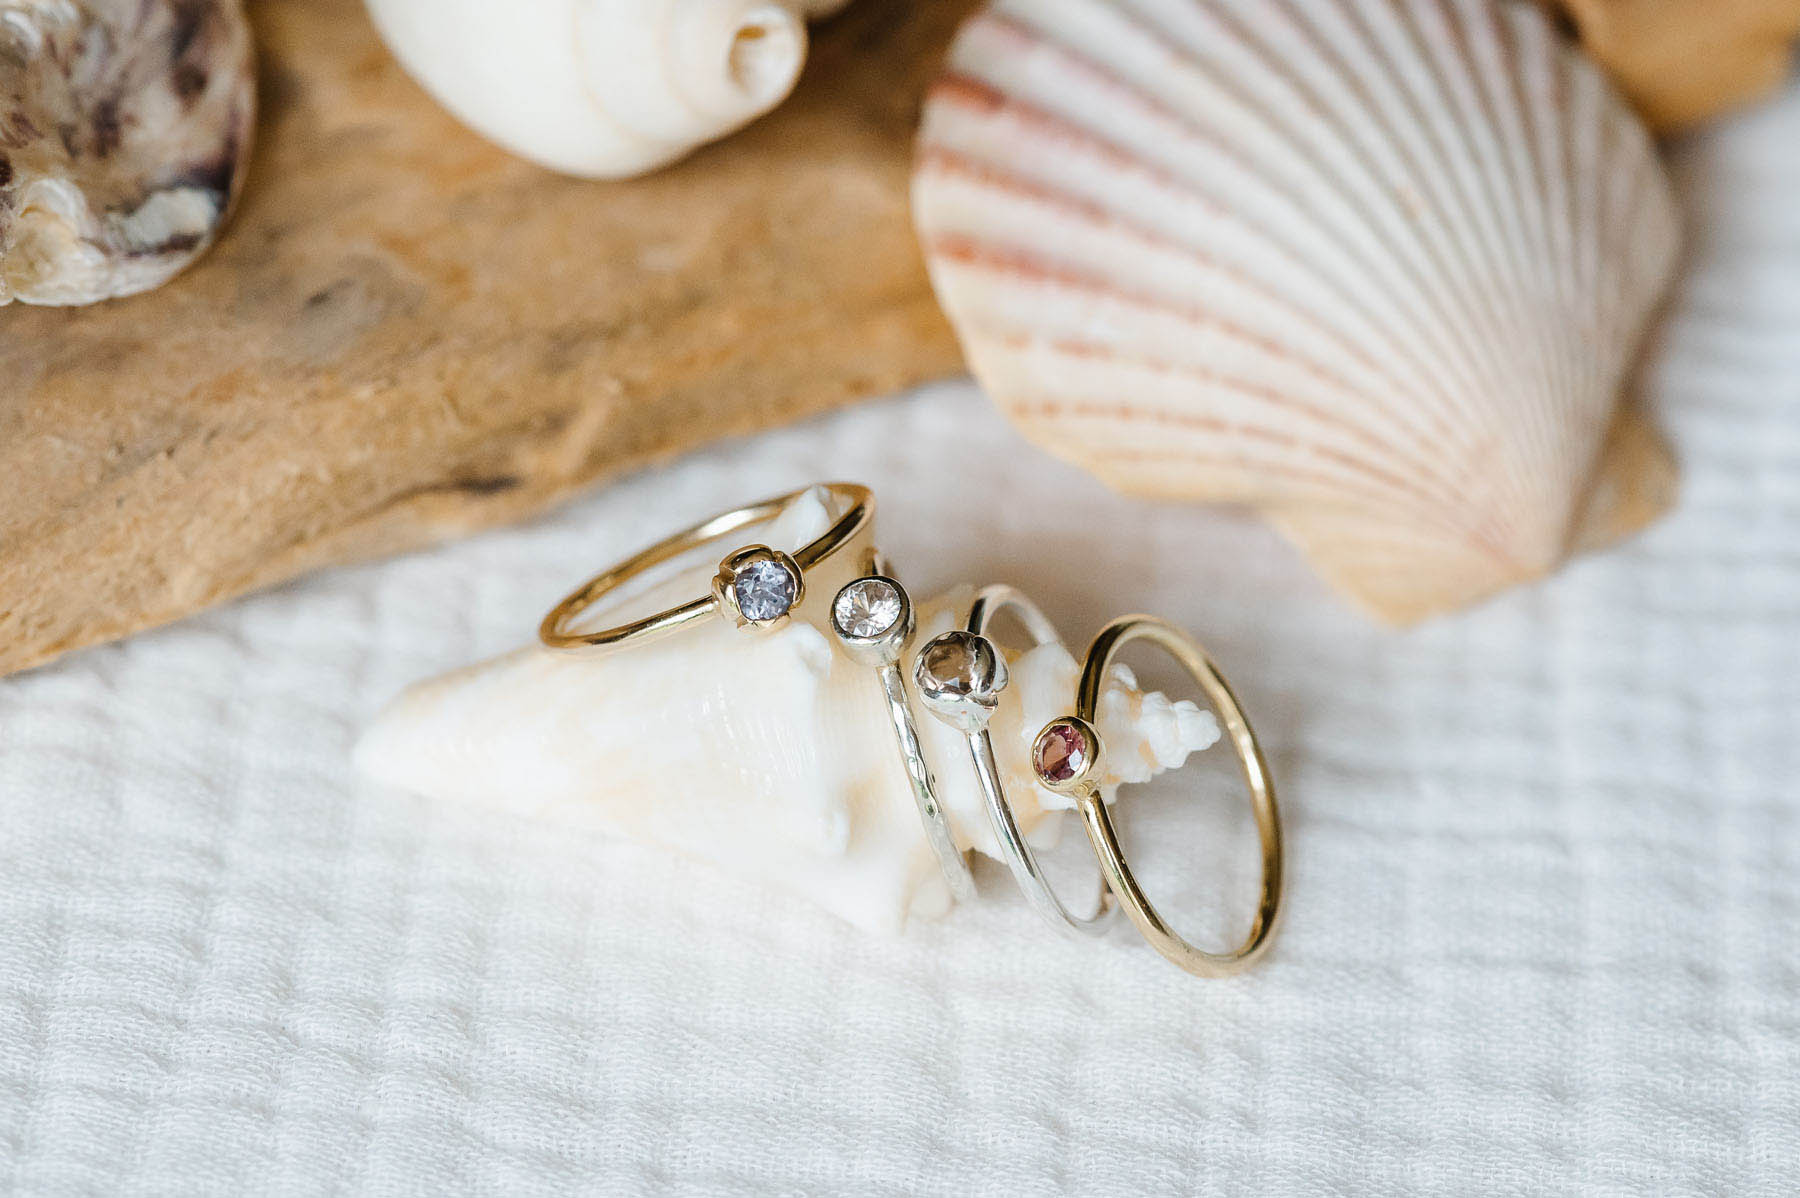 Natural gem stone recycled gold rings by Nikki Stark